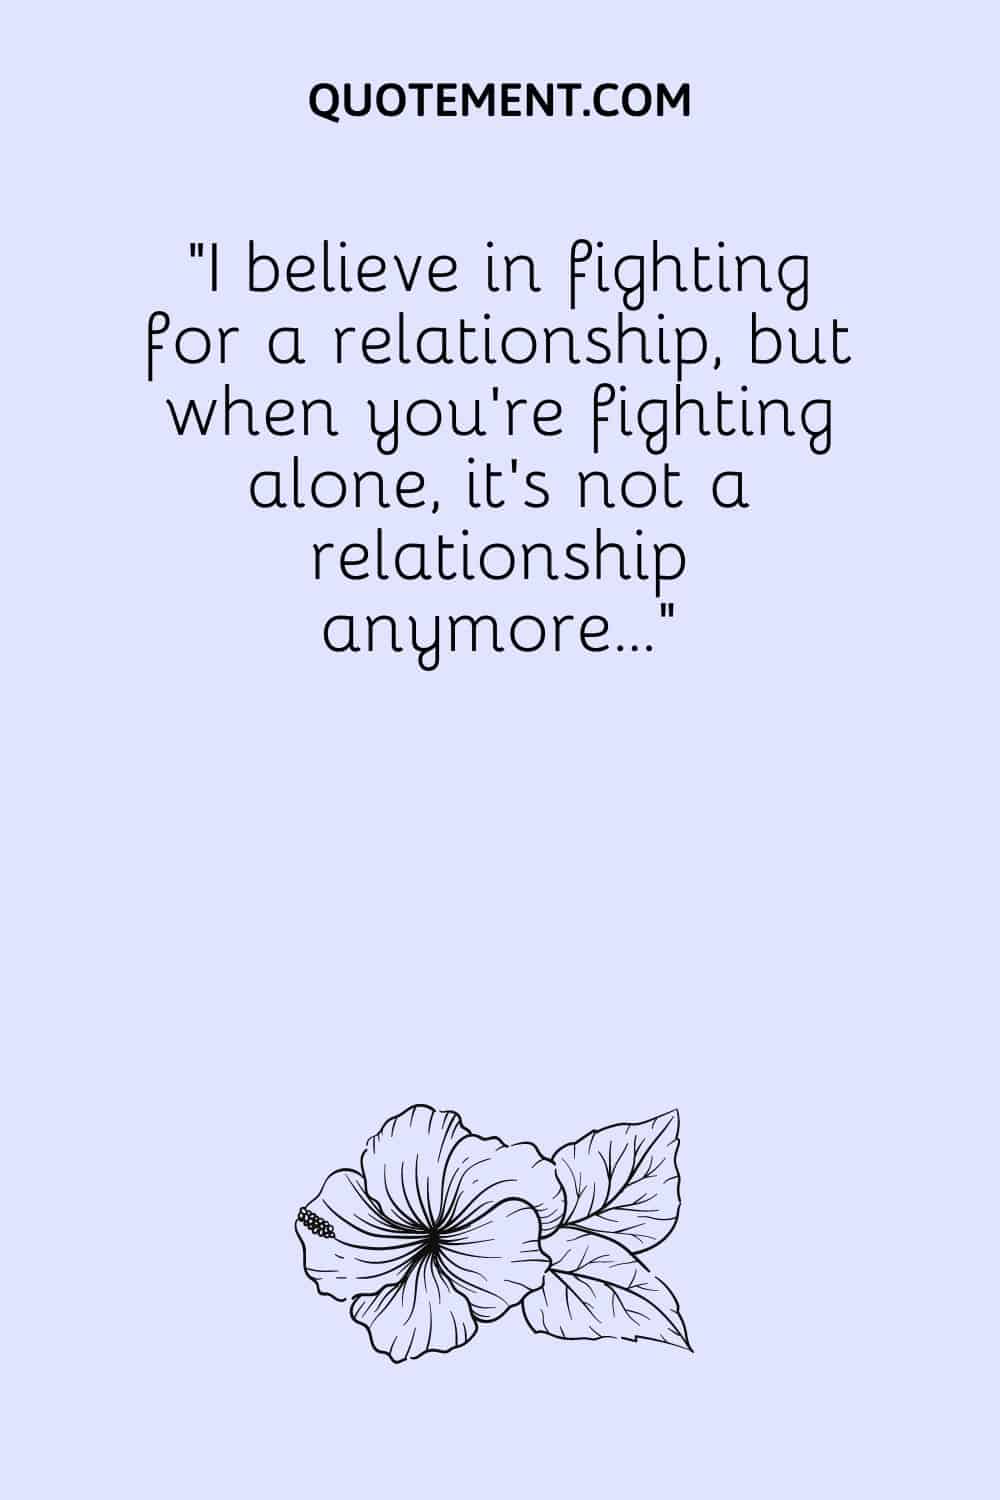 I believe in fighting for a relationship